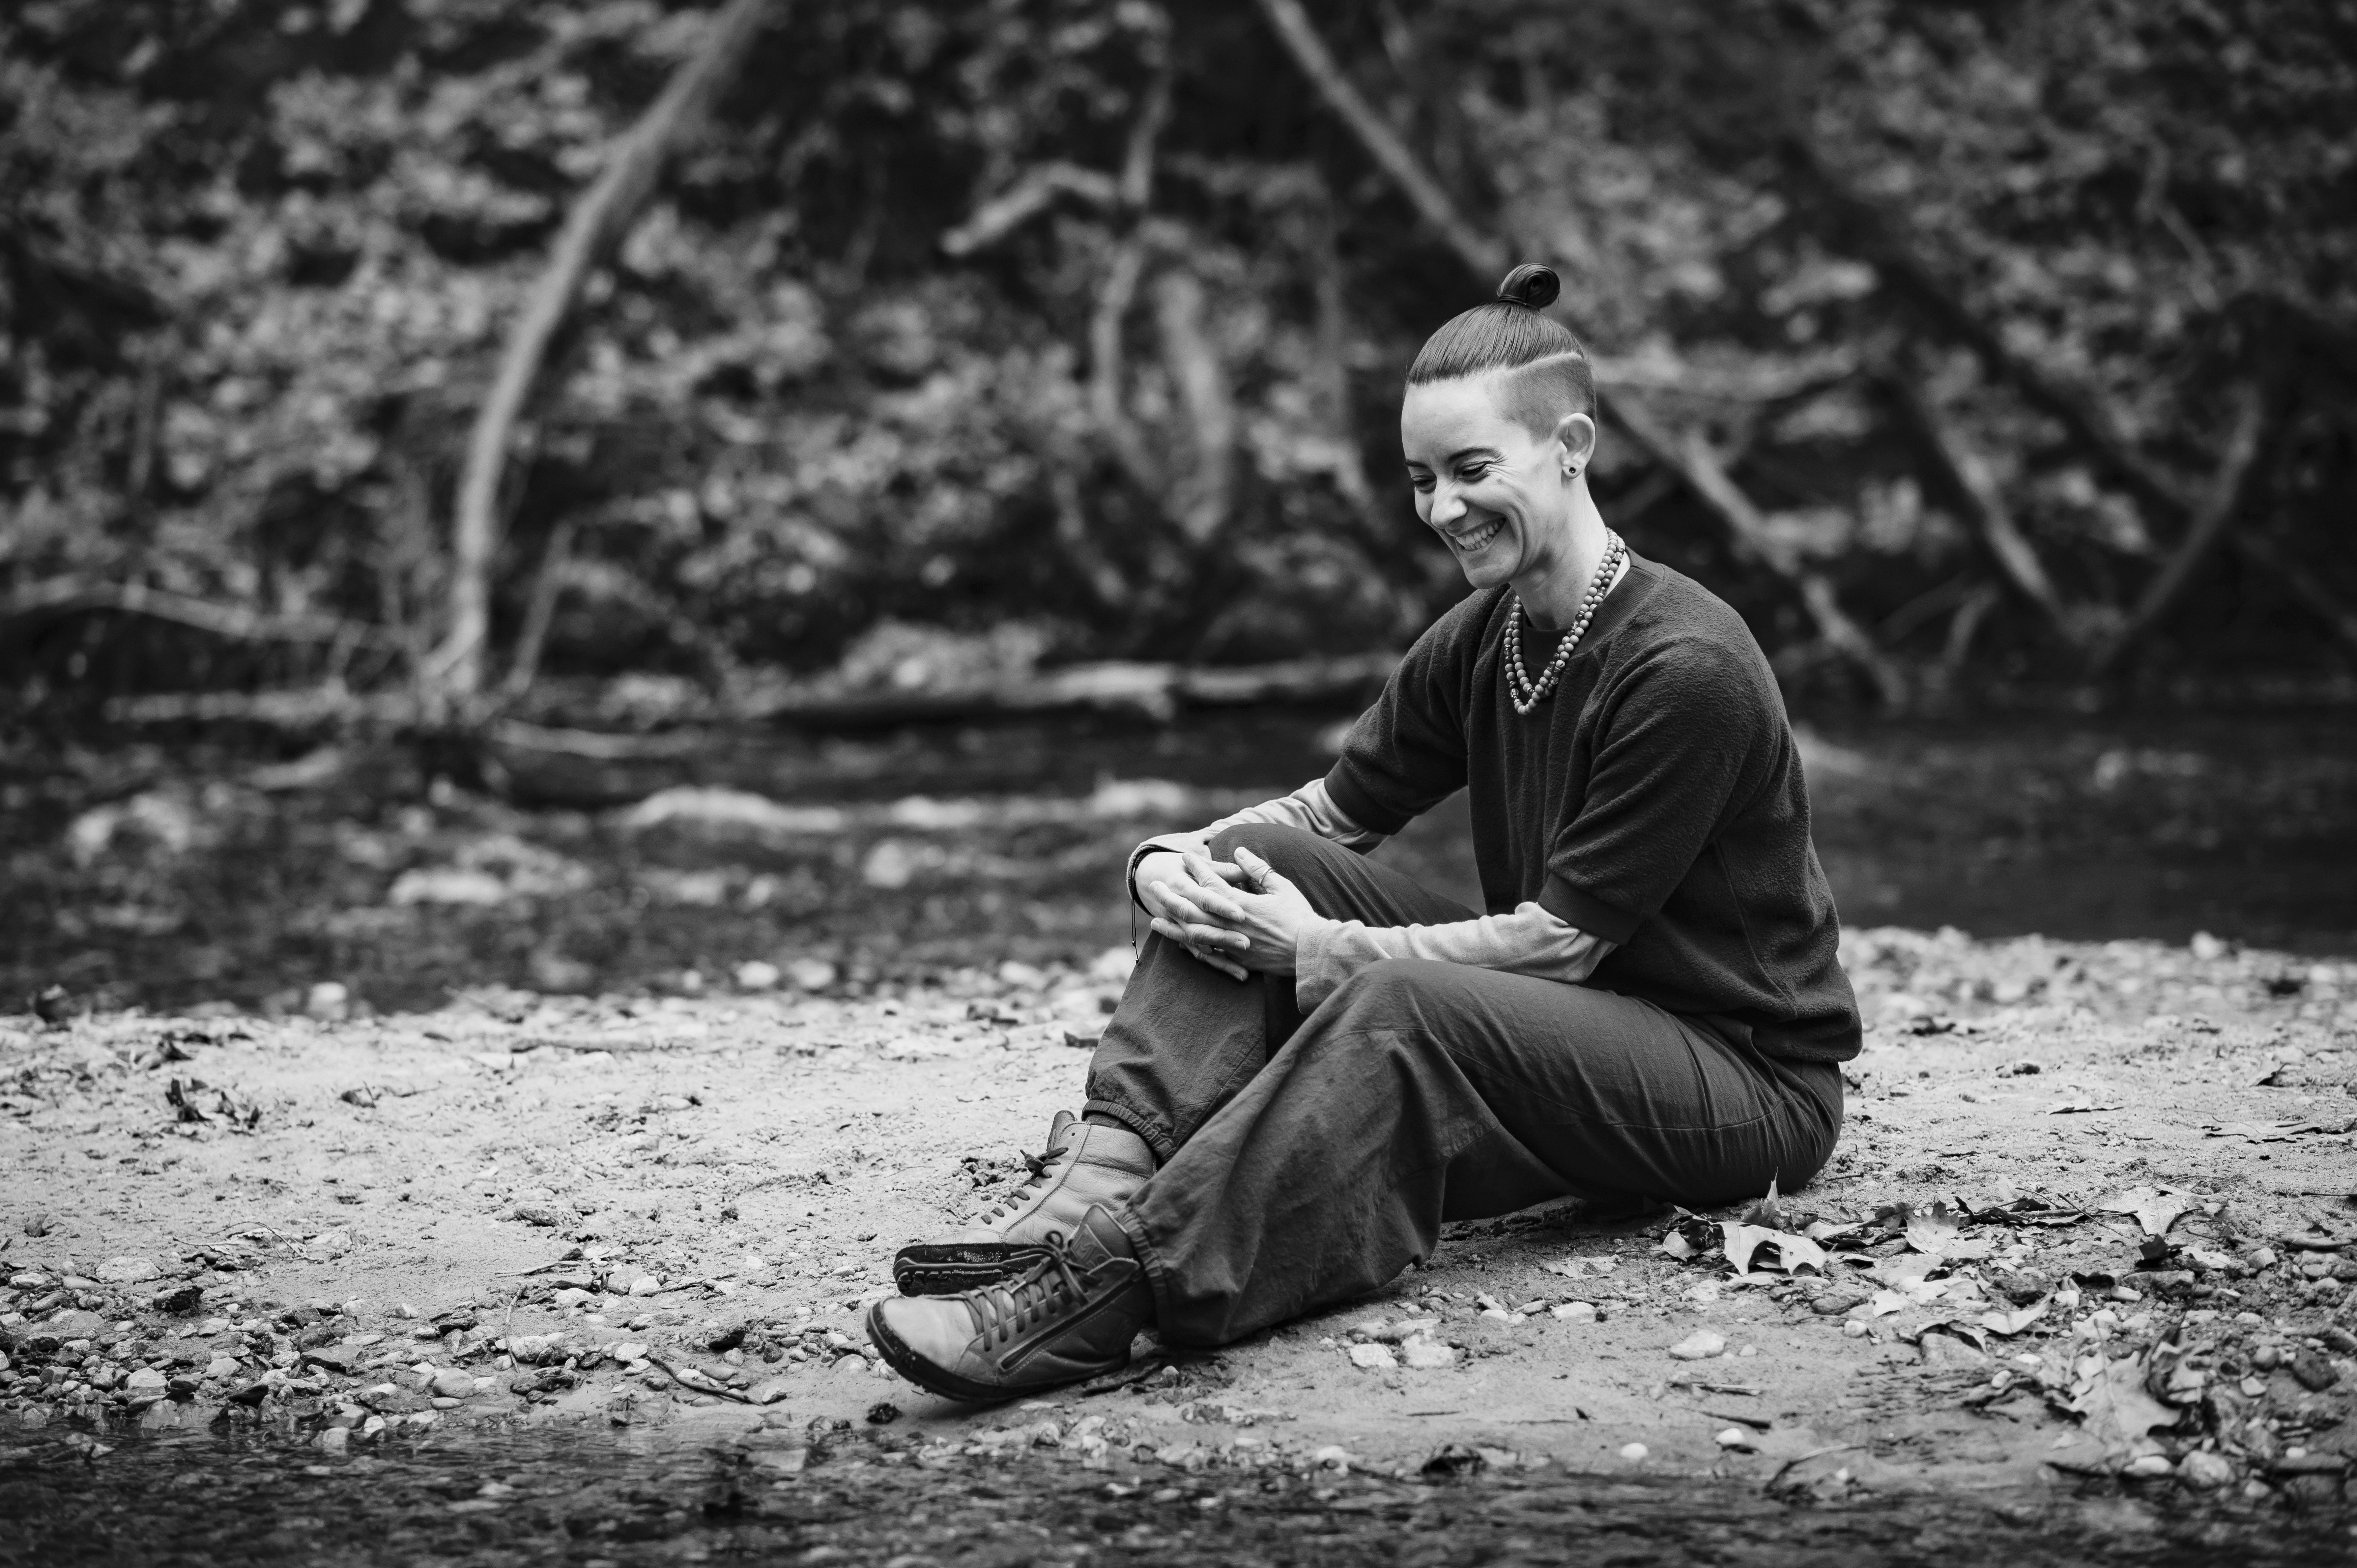 This is a black & white grayscale photograph of a nonbinary person. The person is seated on the ground, facing slightly angled to their right so their left side is visible. The person is smiling, communicating happiness and warmth. They are looking towards the ground which is dirt with stones and leaves. Their hair is an undercut with the top part pulled back into a bun. They have a beaded necklace on. They are wearing a darker colored short sleeve shirt over a lighter colored long sleeve shirt. There is a stream and the opposite bank with tree roots in the background.